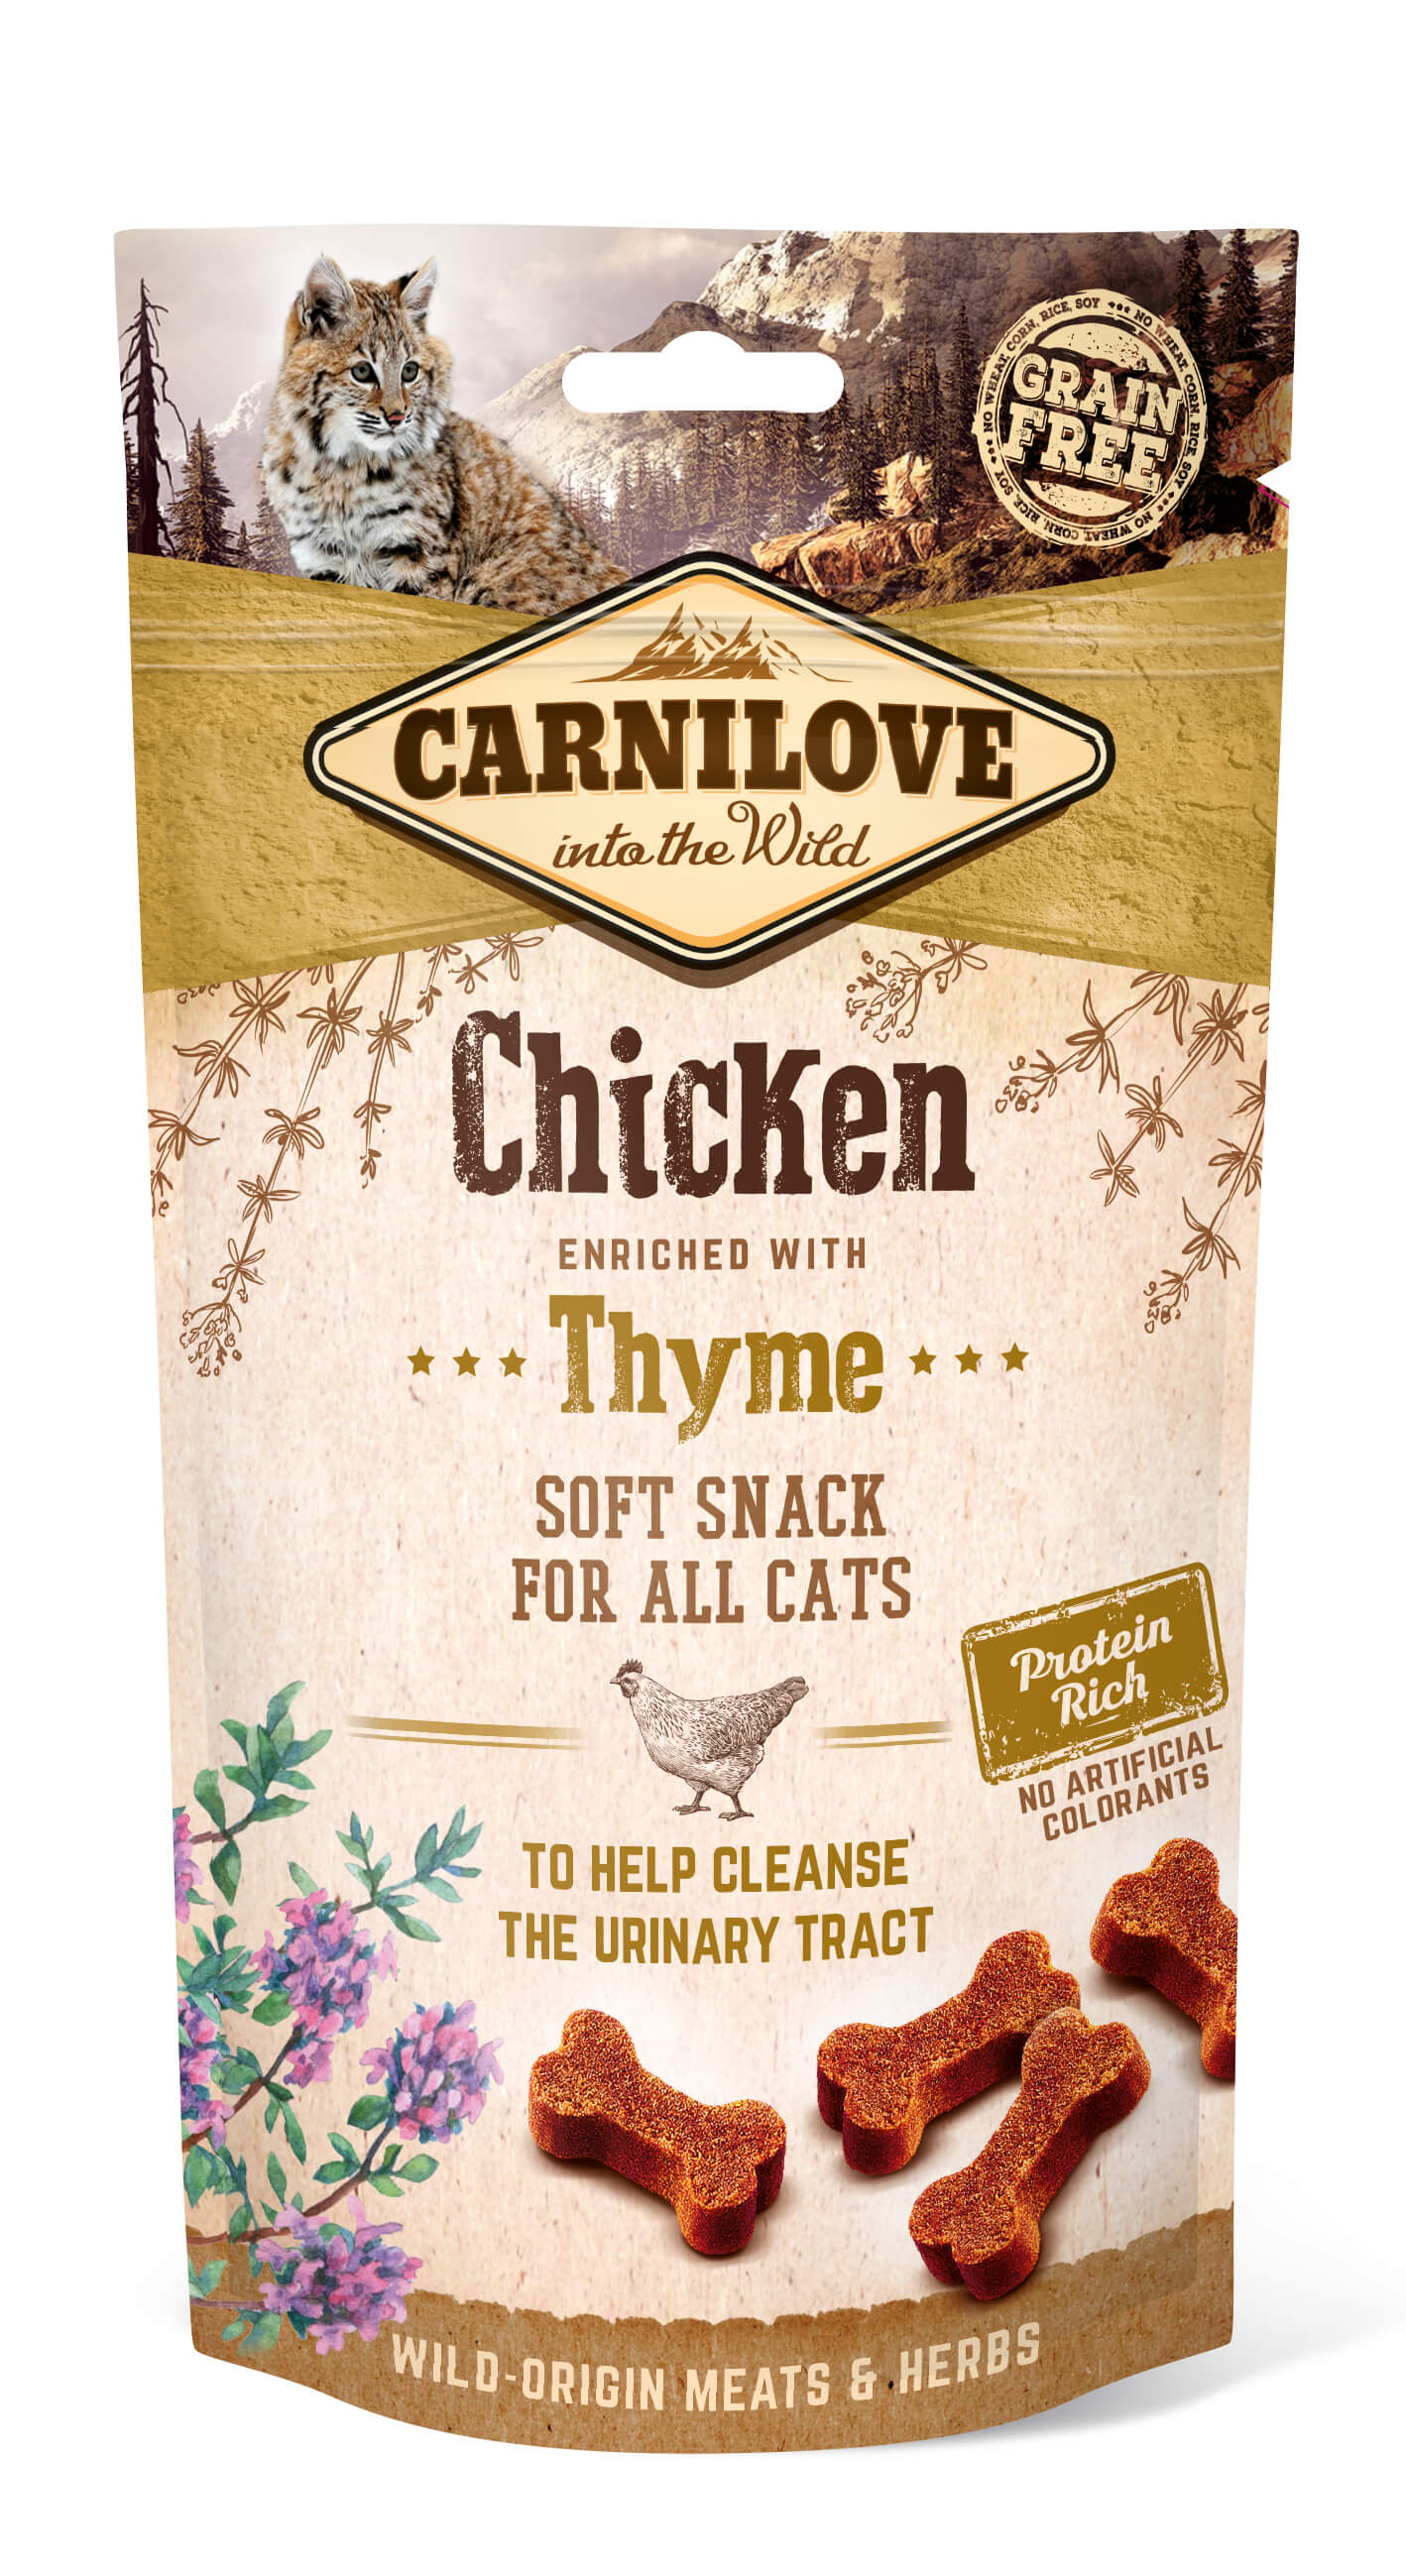 Carnilove Cat Soft Snack - Chicken with Thyme 50g